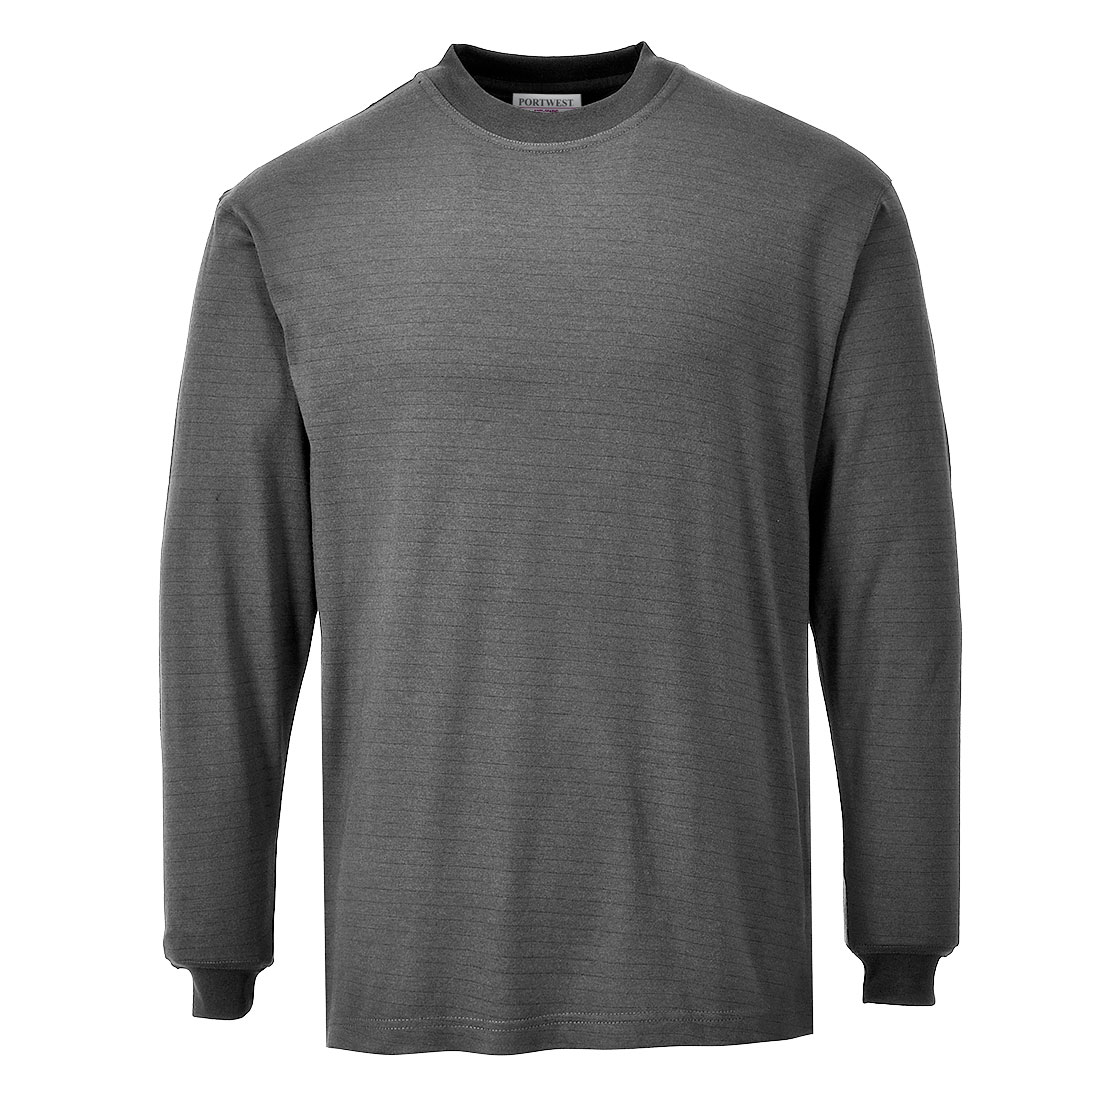 Flame Resistant Anti-Static Long Sleeve T-Shirt - Grey